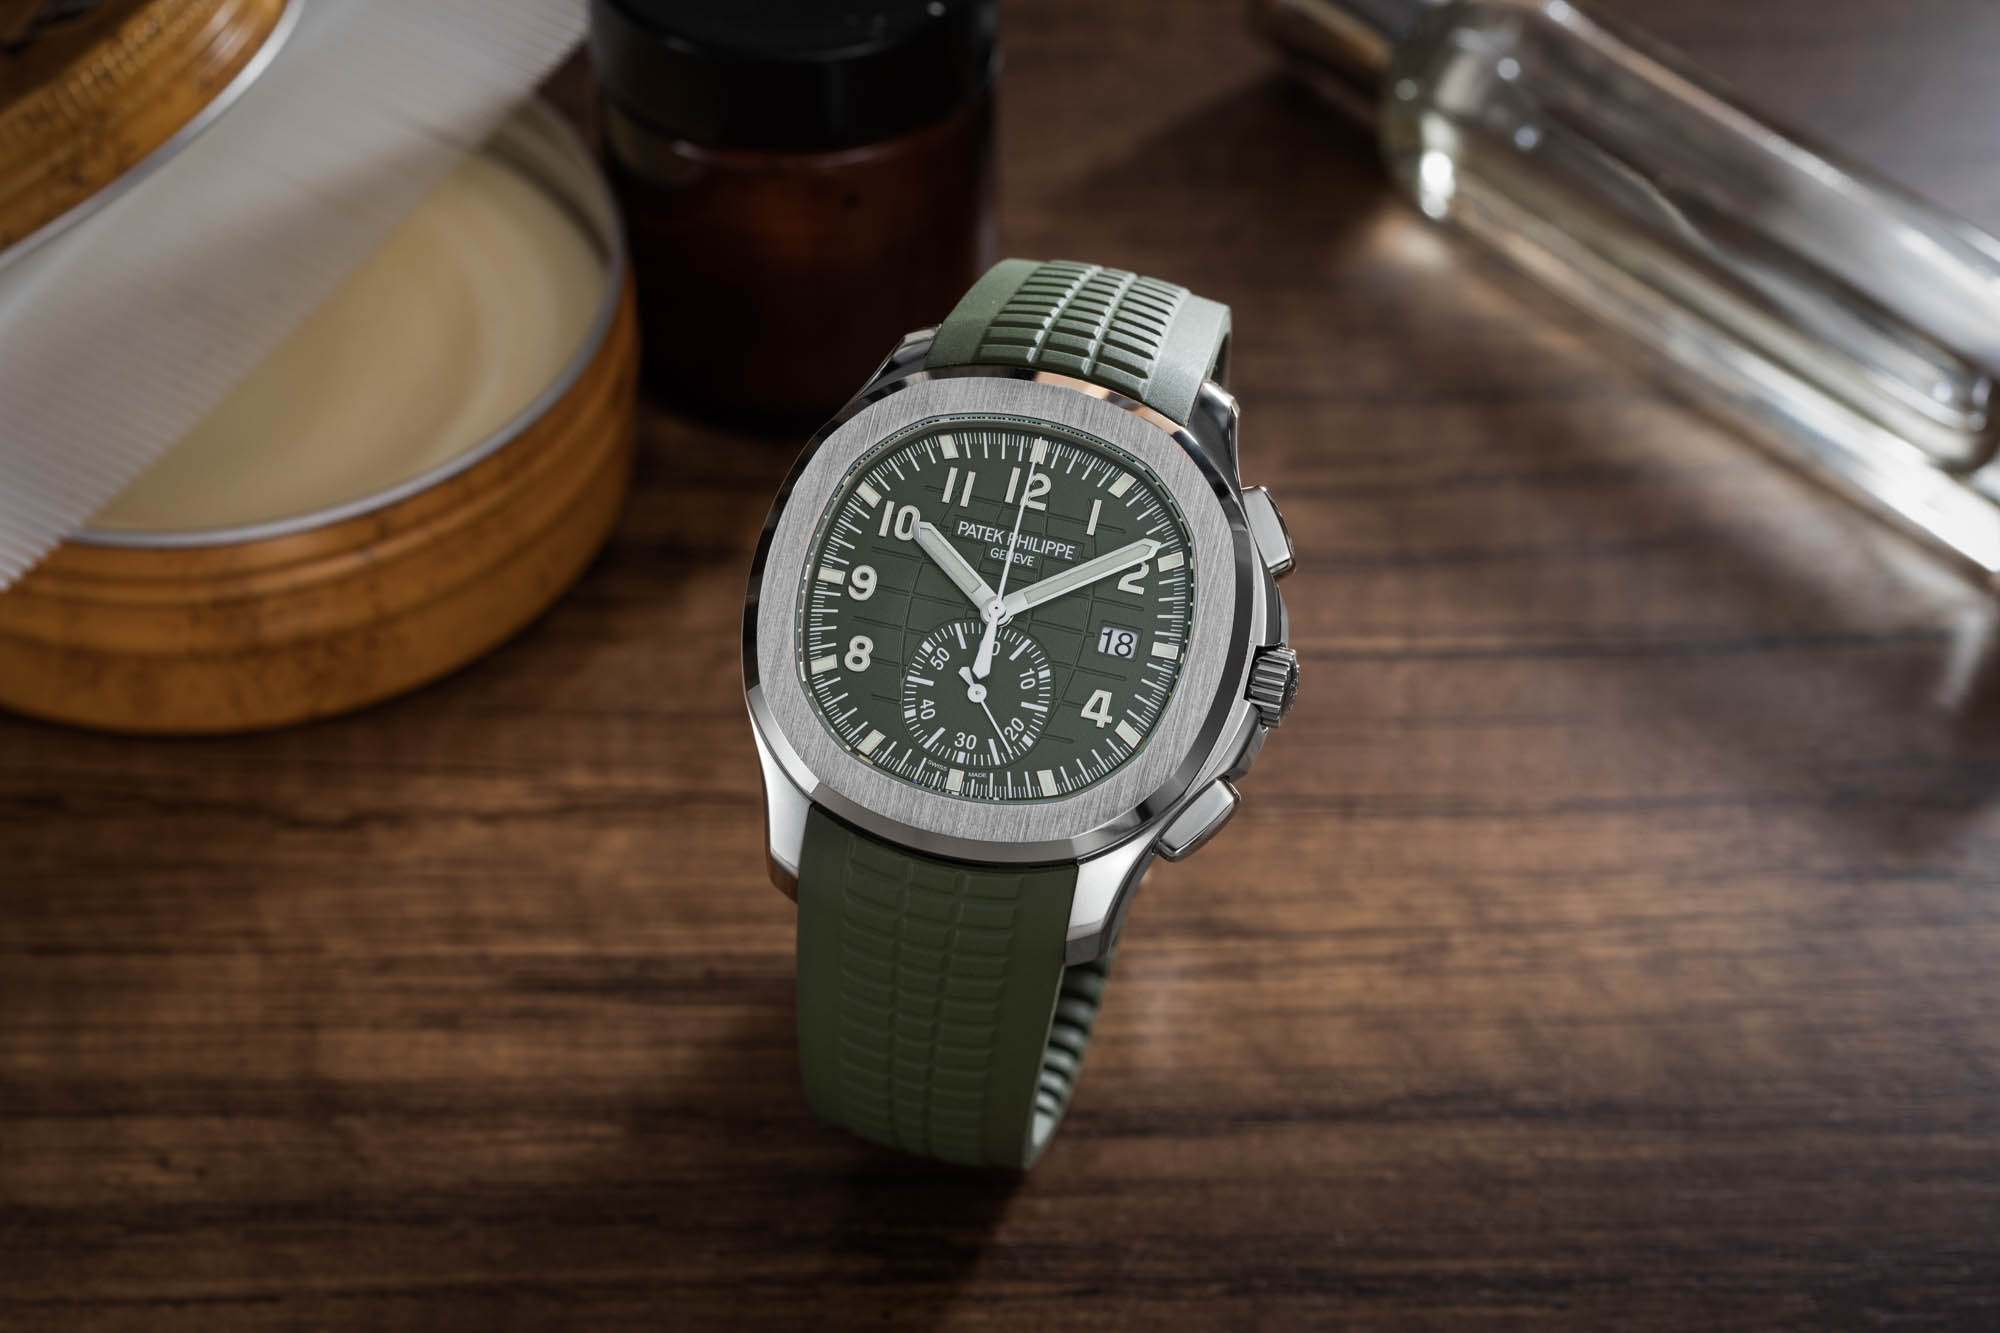 Patek Philippe Aquanaut Flyback Chronograph Ref. 5968G 010 Features A Khaki Green Dial And Matching Composite Strap, Contrasting Nicely With Its White Gold Case, Bezel, And Crown.